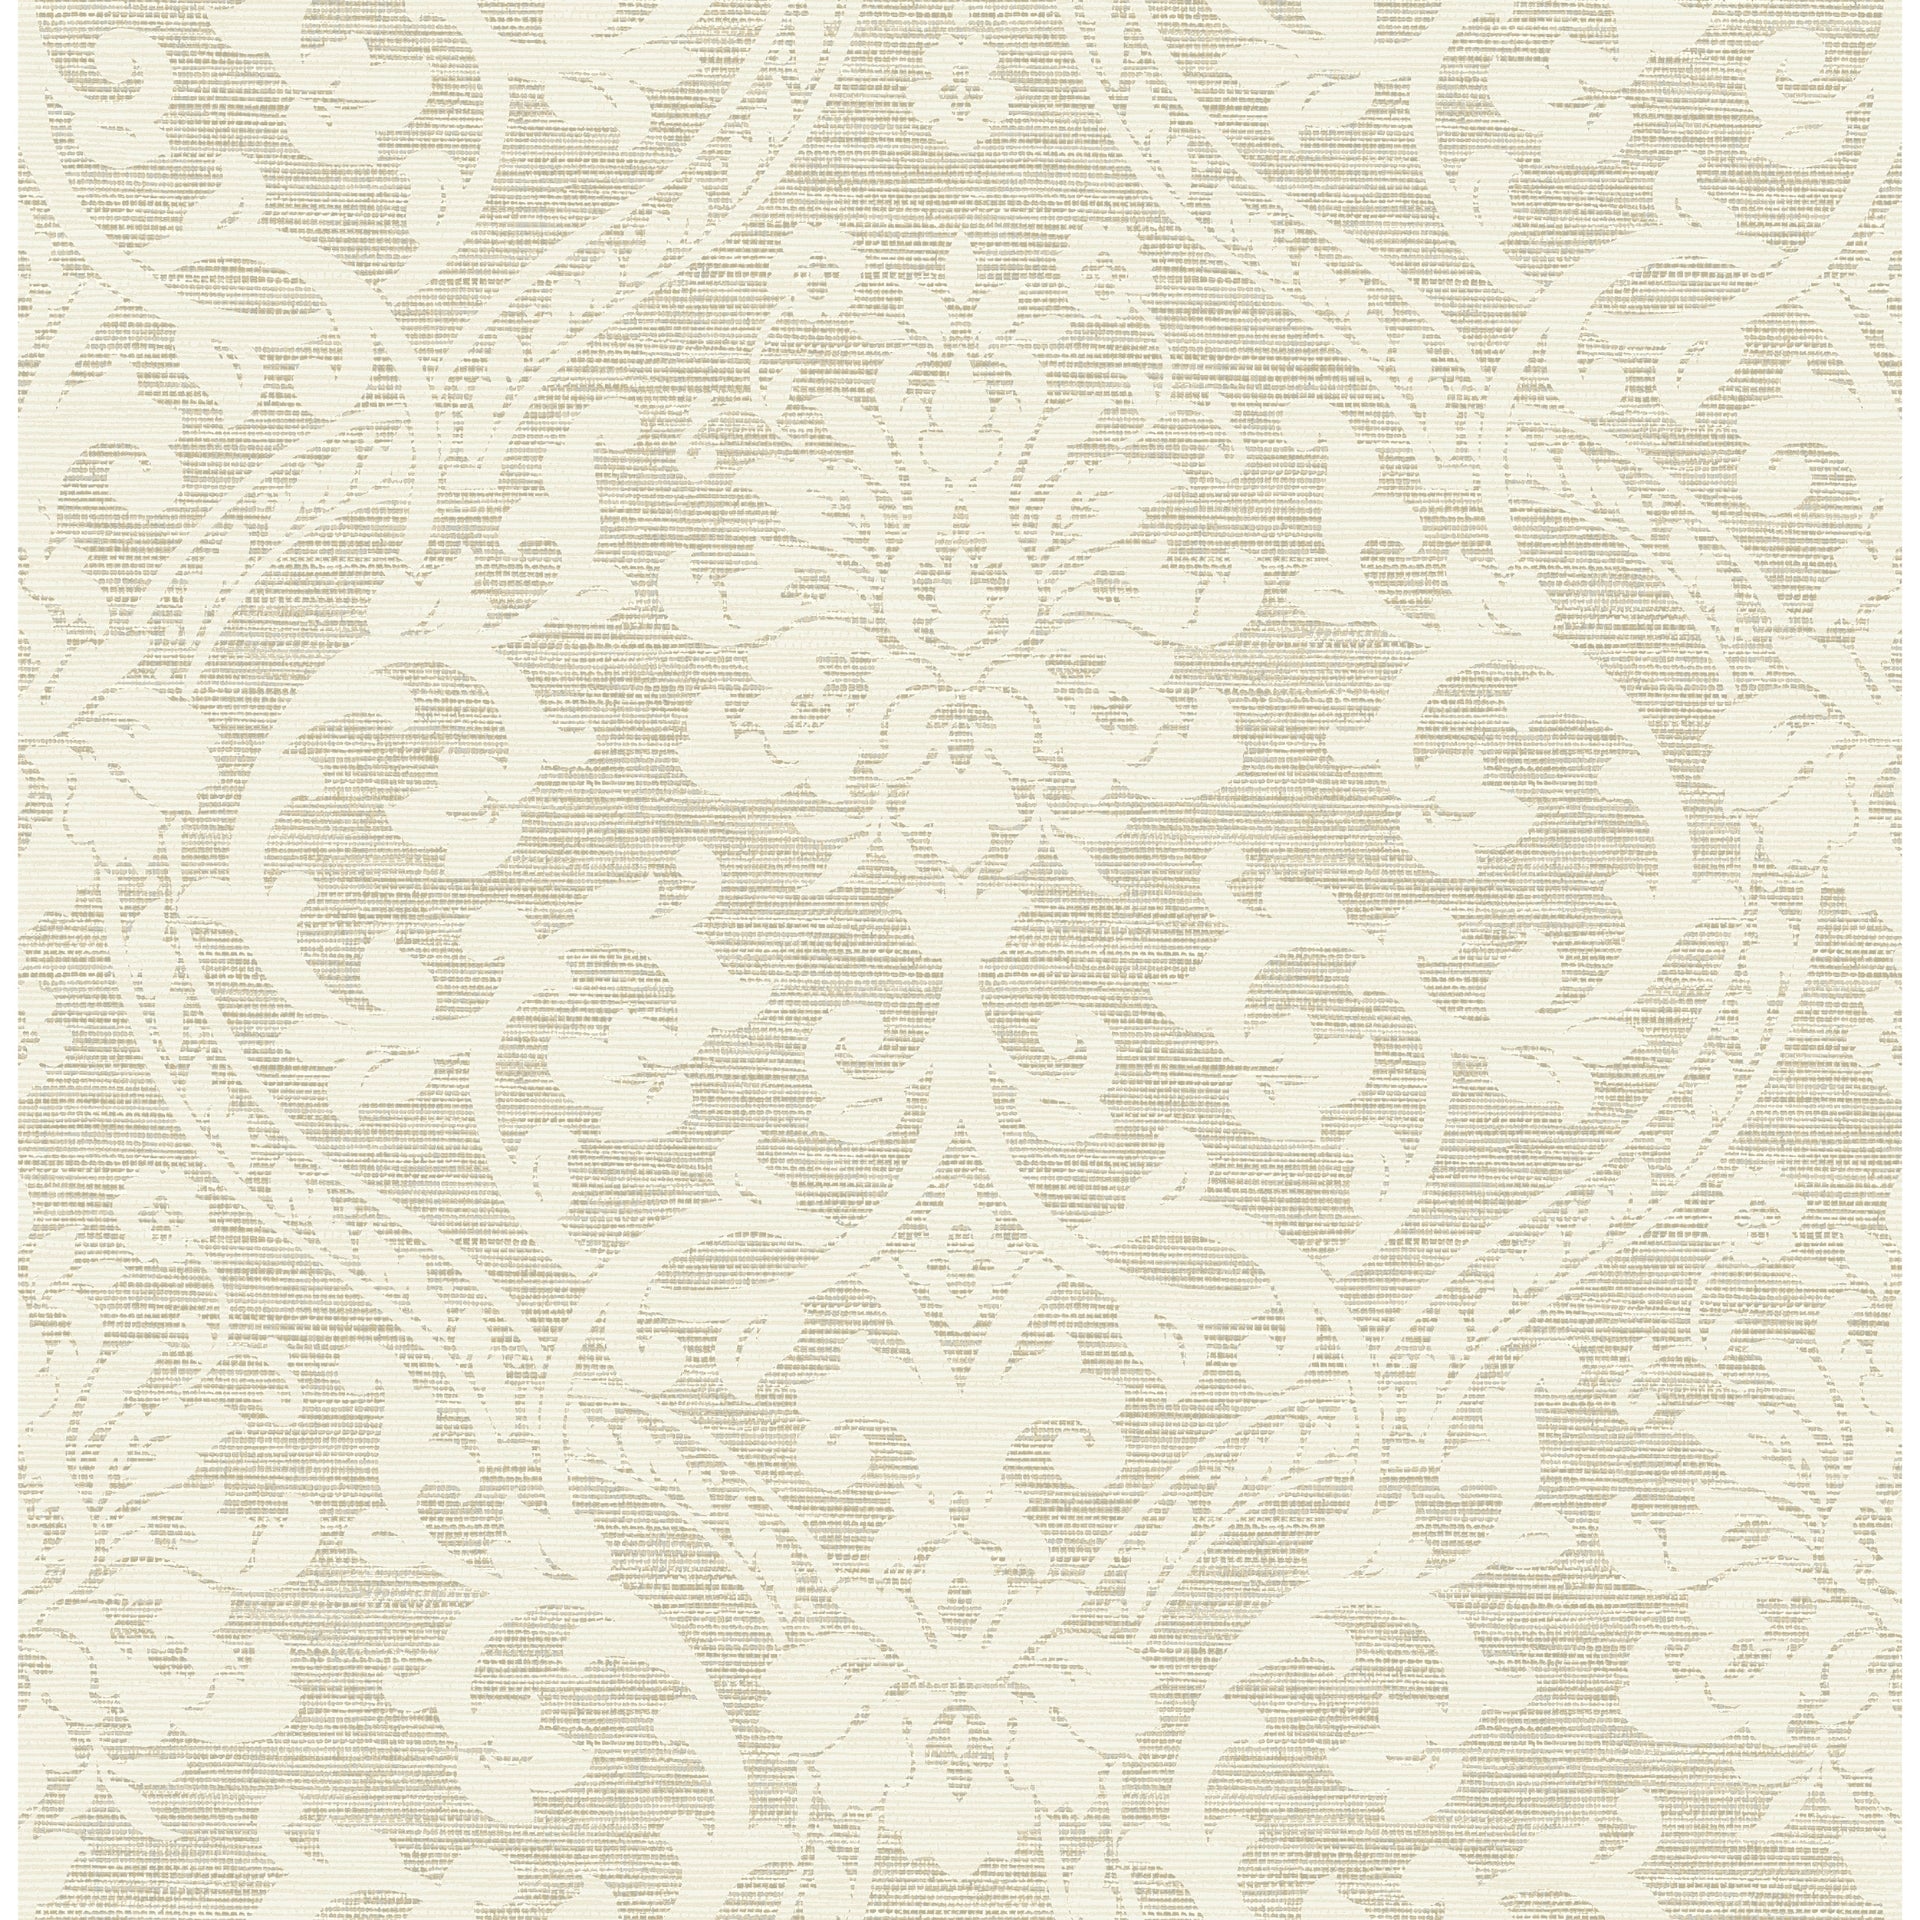 Picture of Evette Neutral Damask Wallpaper